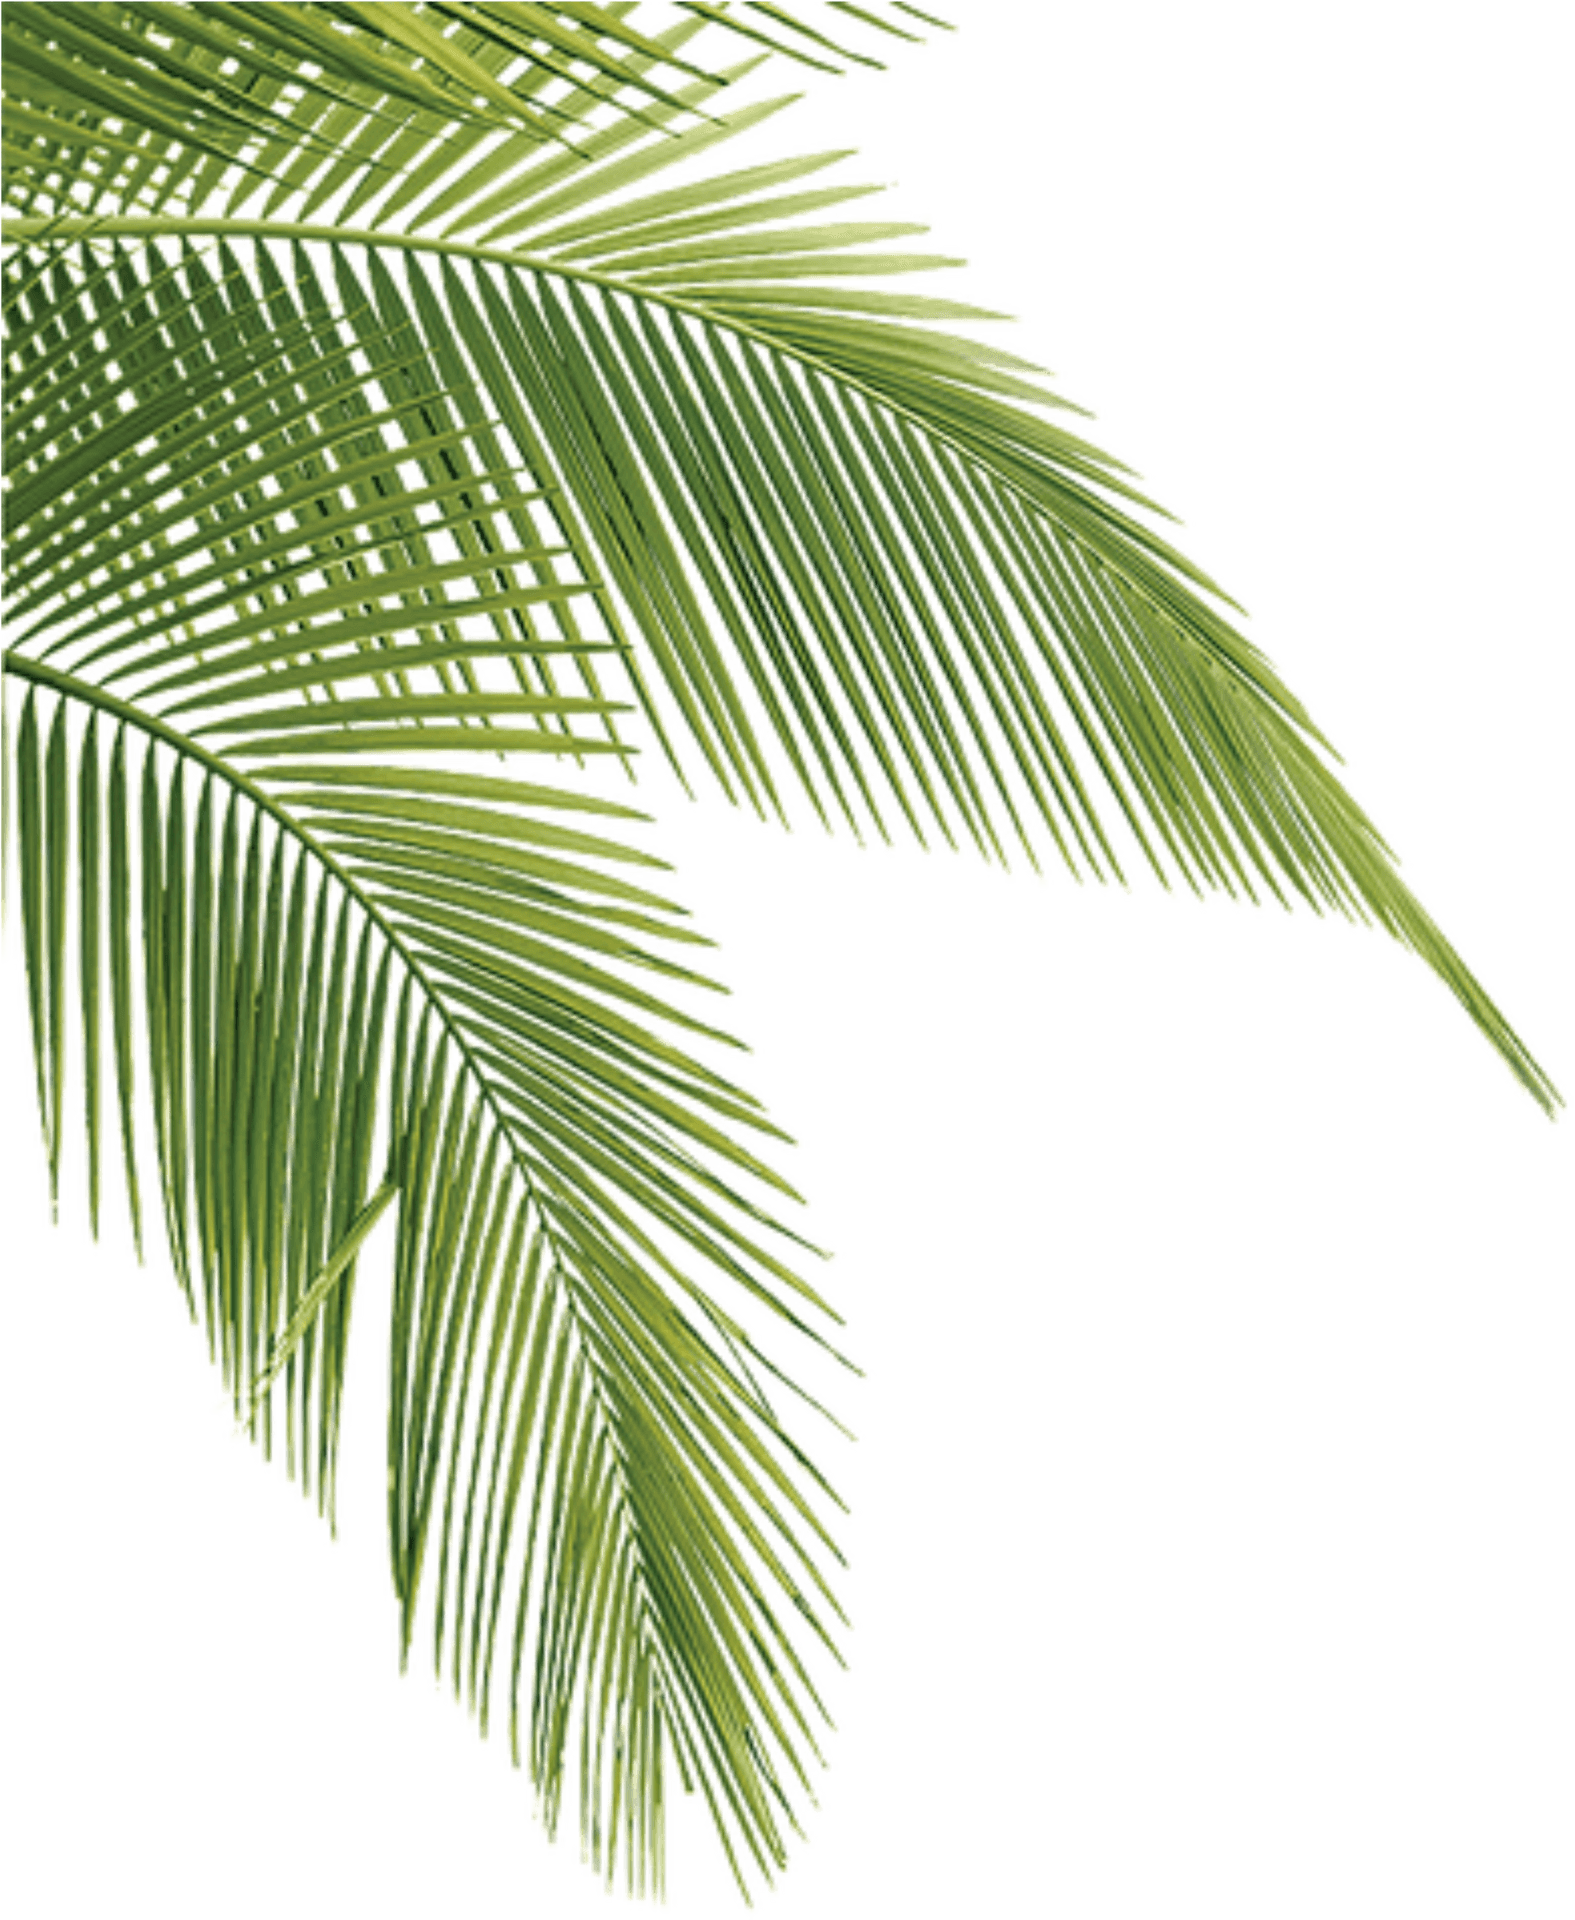 Vibrant Green Palm Leaves PNG image